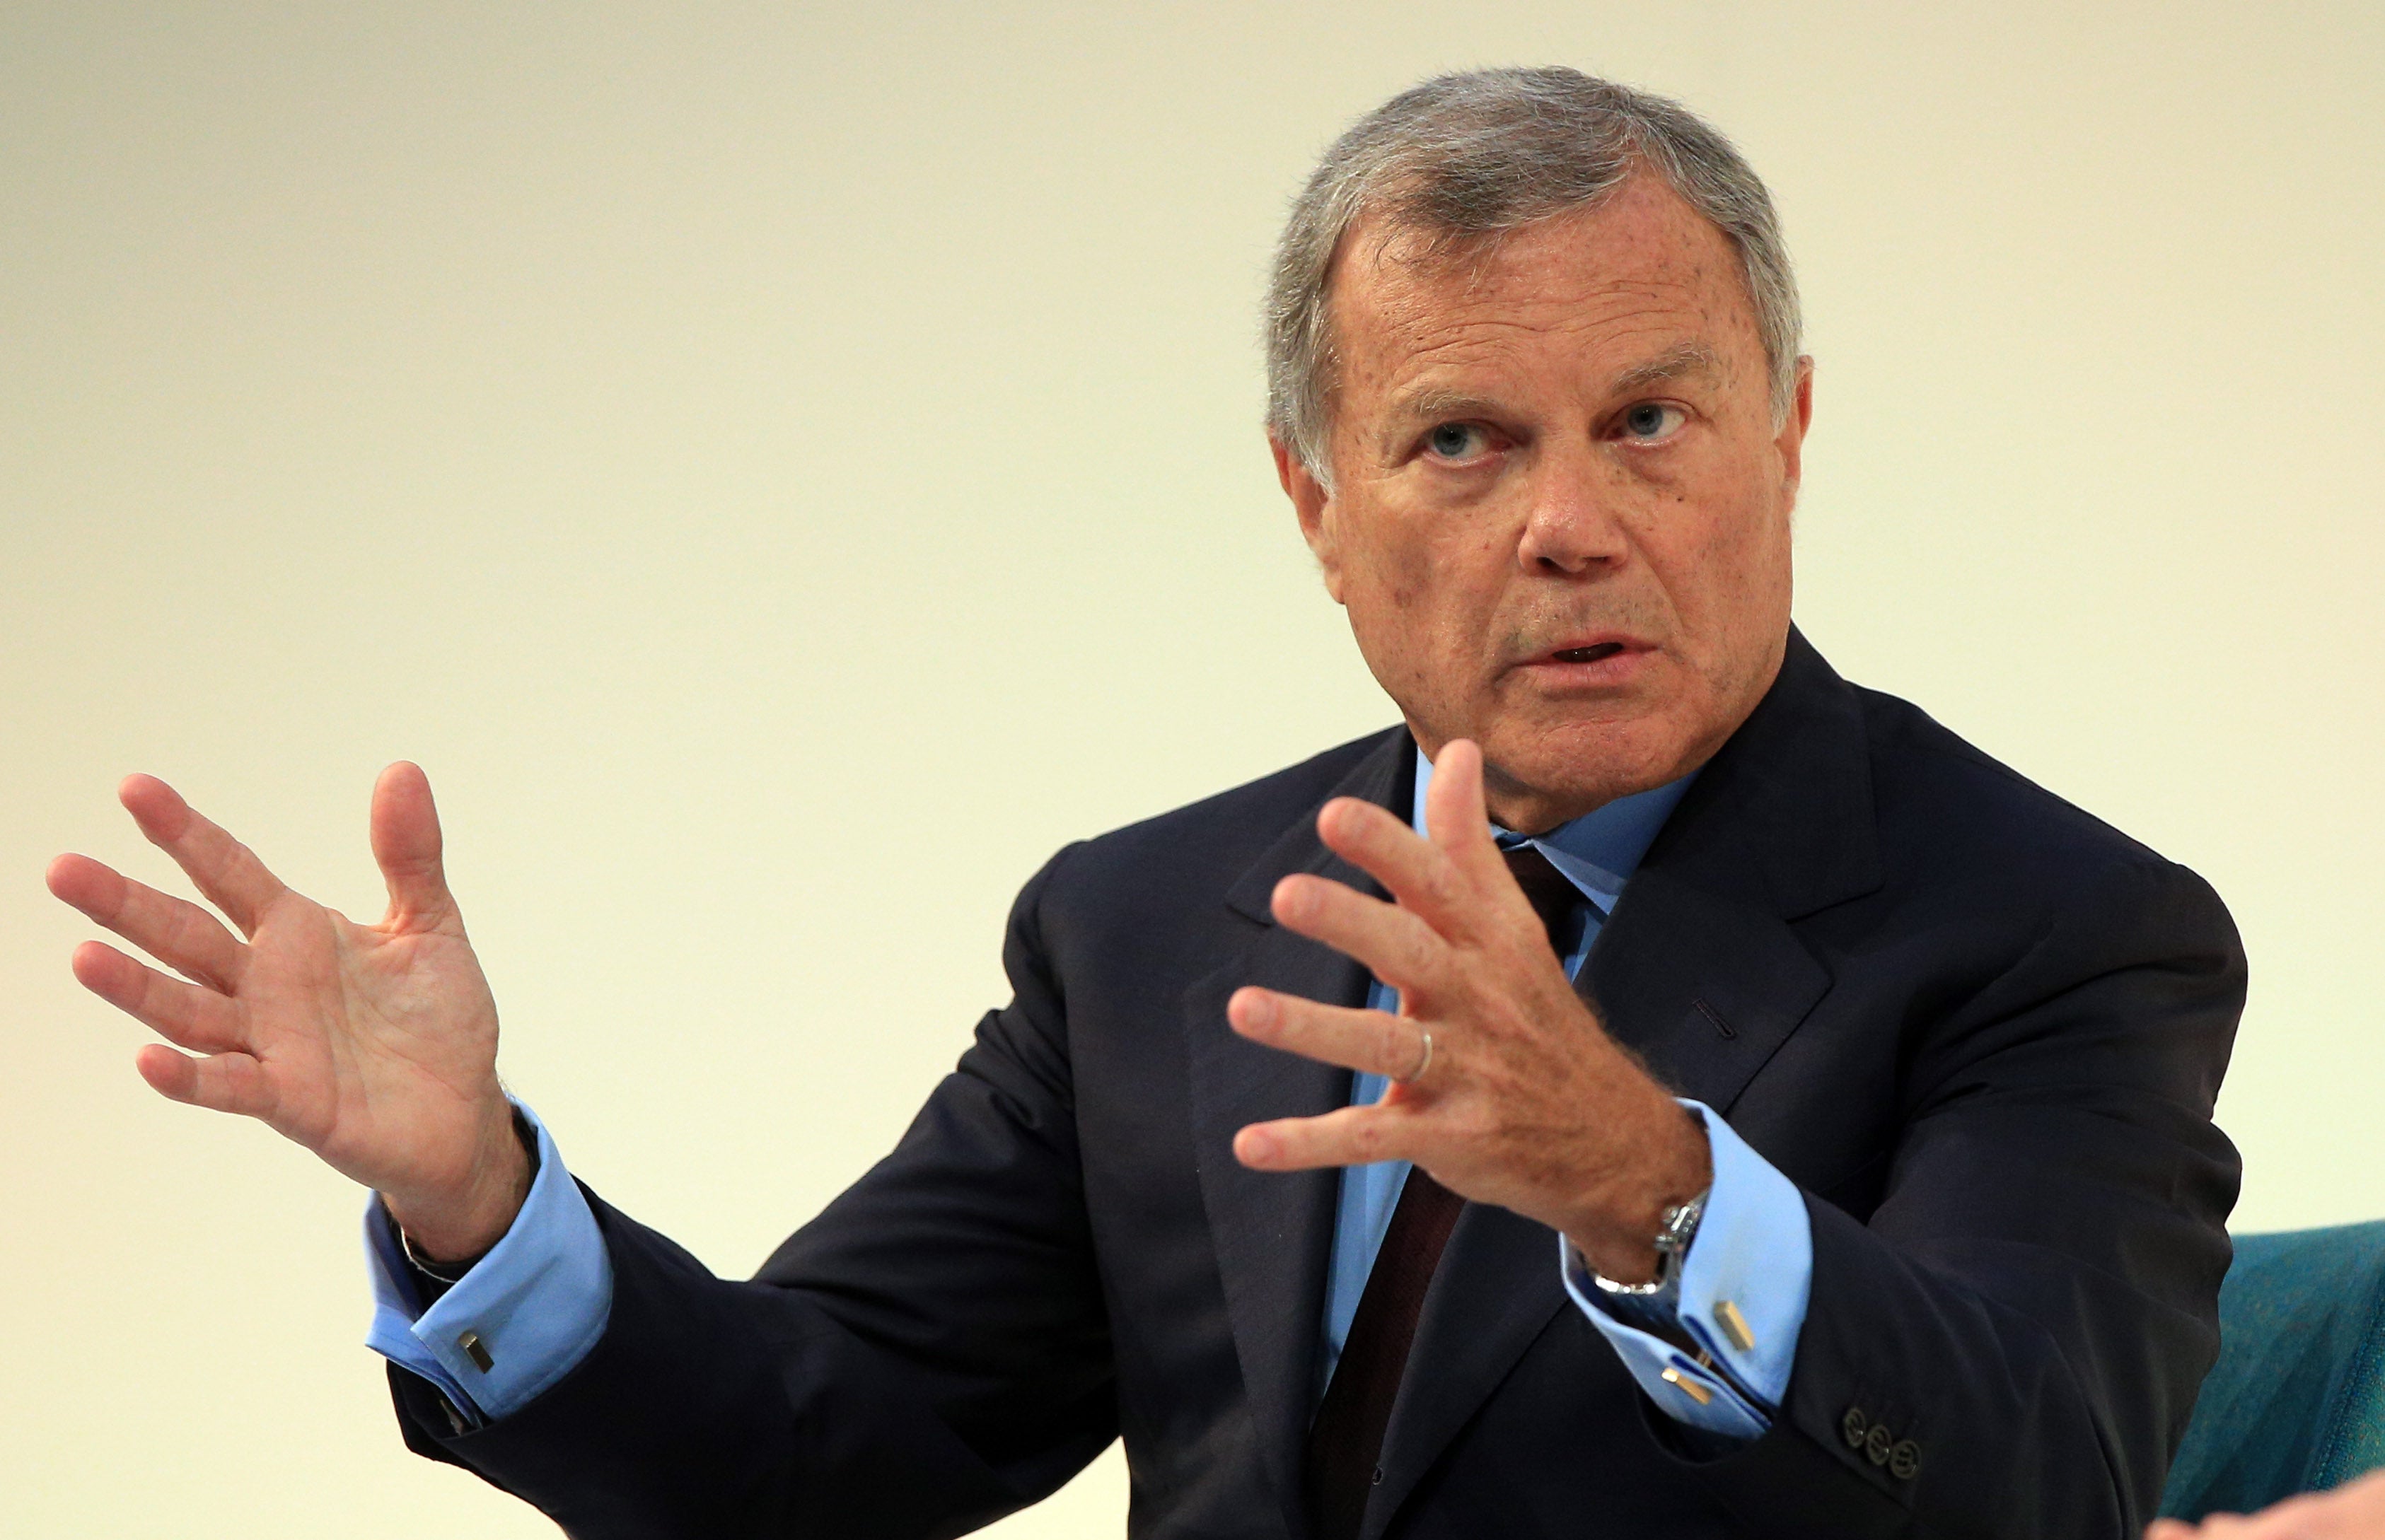 S4 Capital founder Sir Martin Sorrell has apologised after the firm posted significantly delayed results (Jonathan Brady/PA)